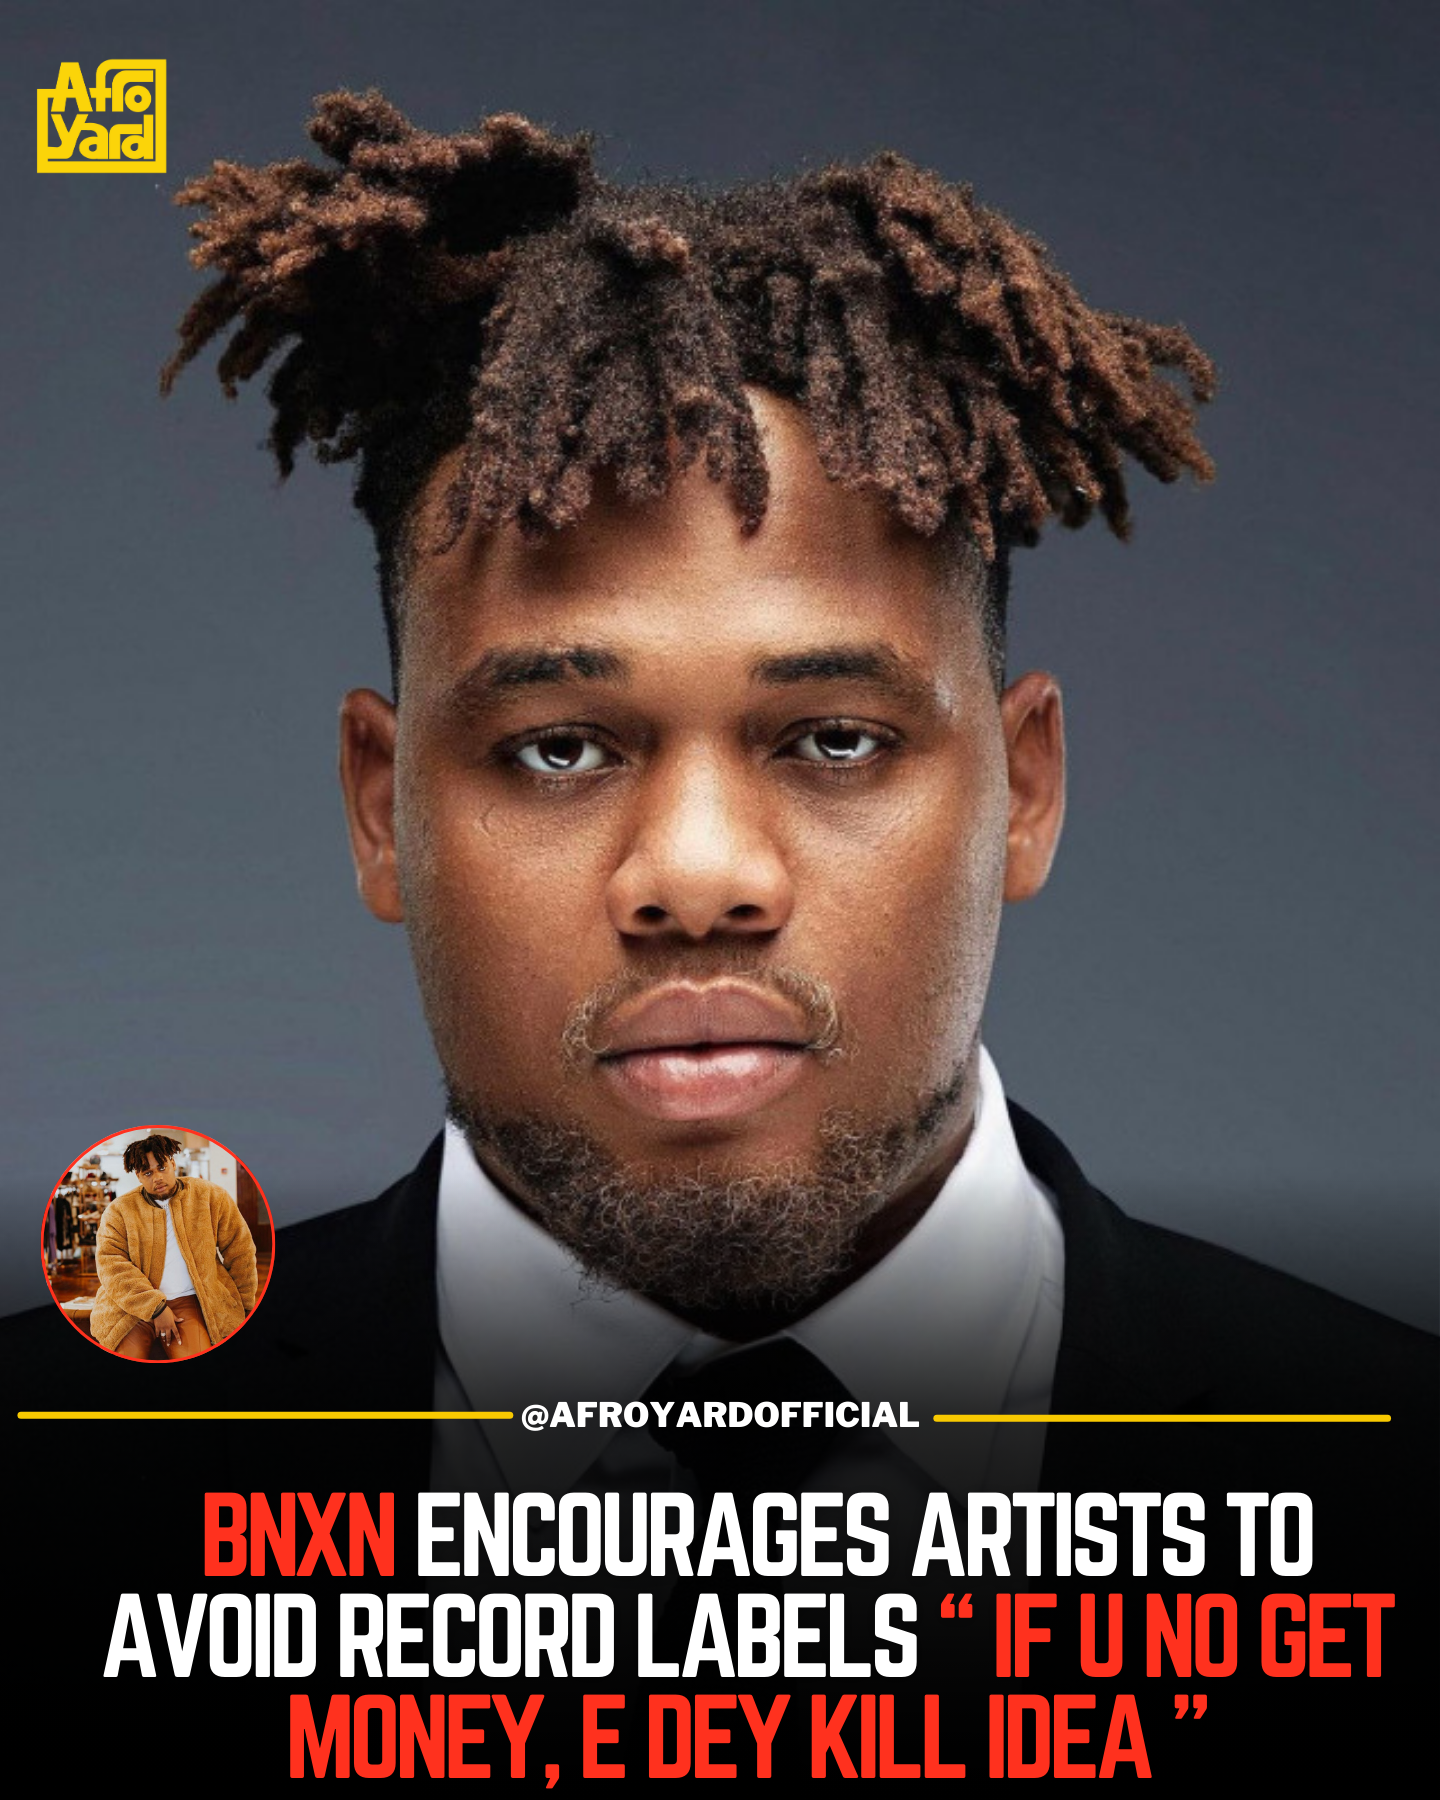  BNXN Encourages Artists to Avoid Record Labels